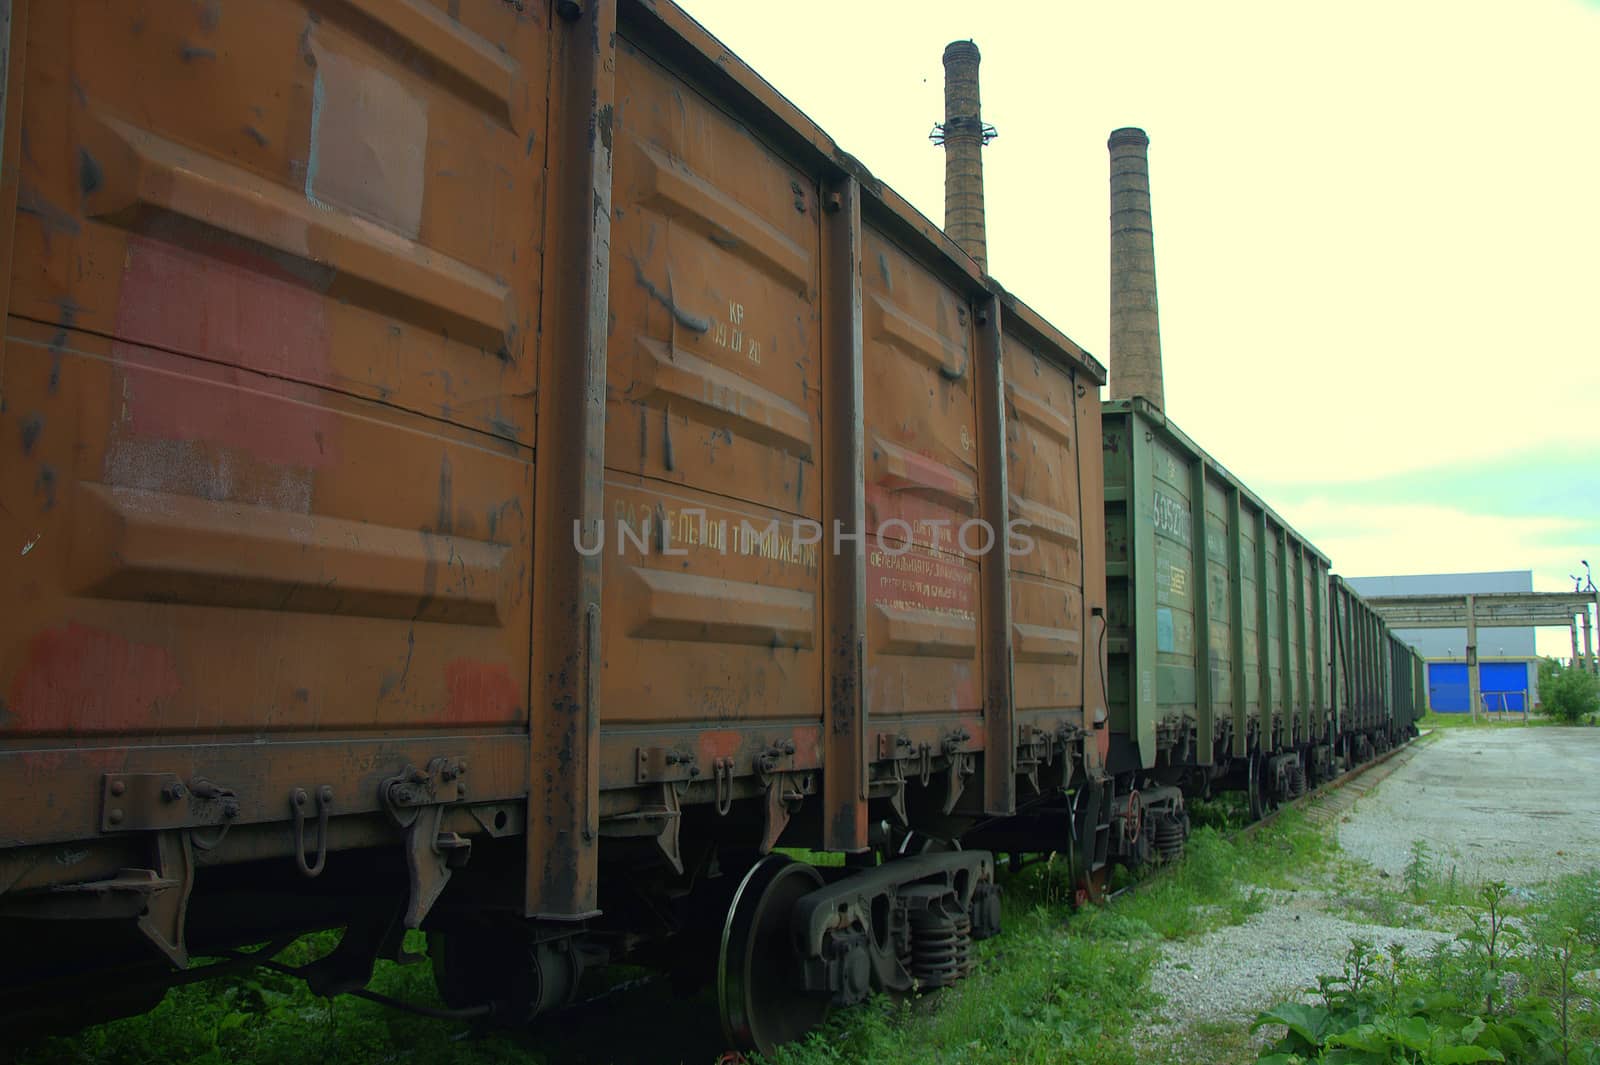 Railway cars are at an impasse in front of the old plant on the background of pipes.